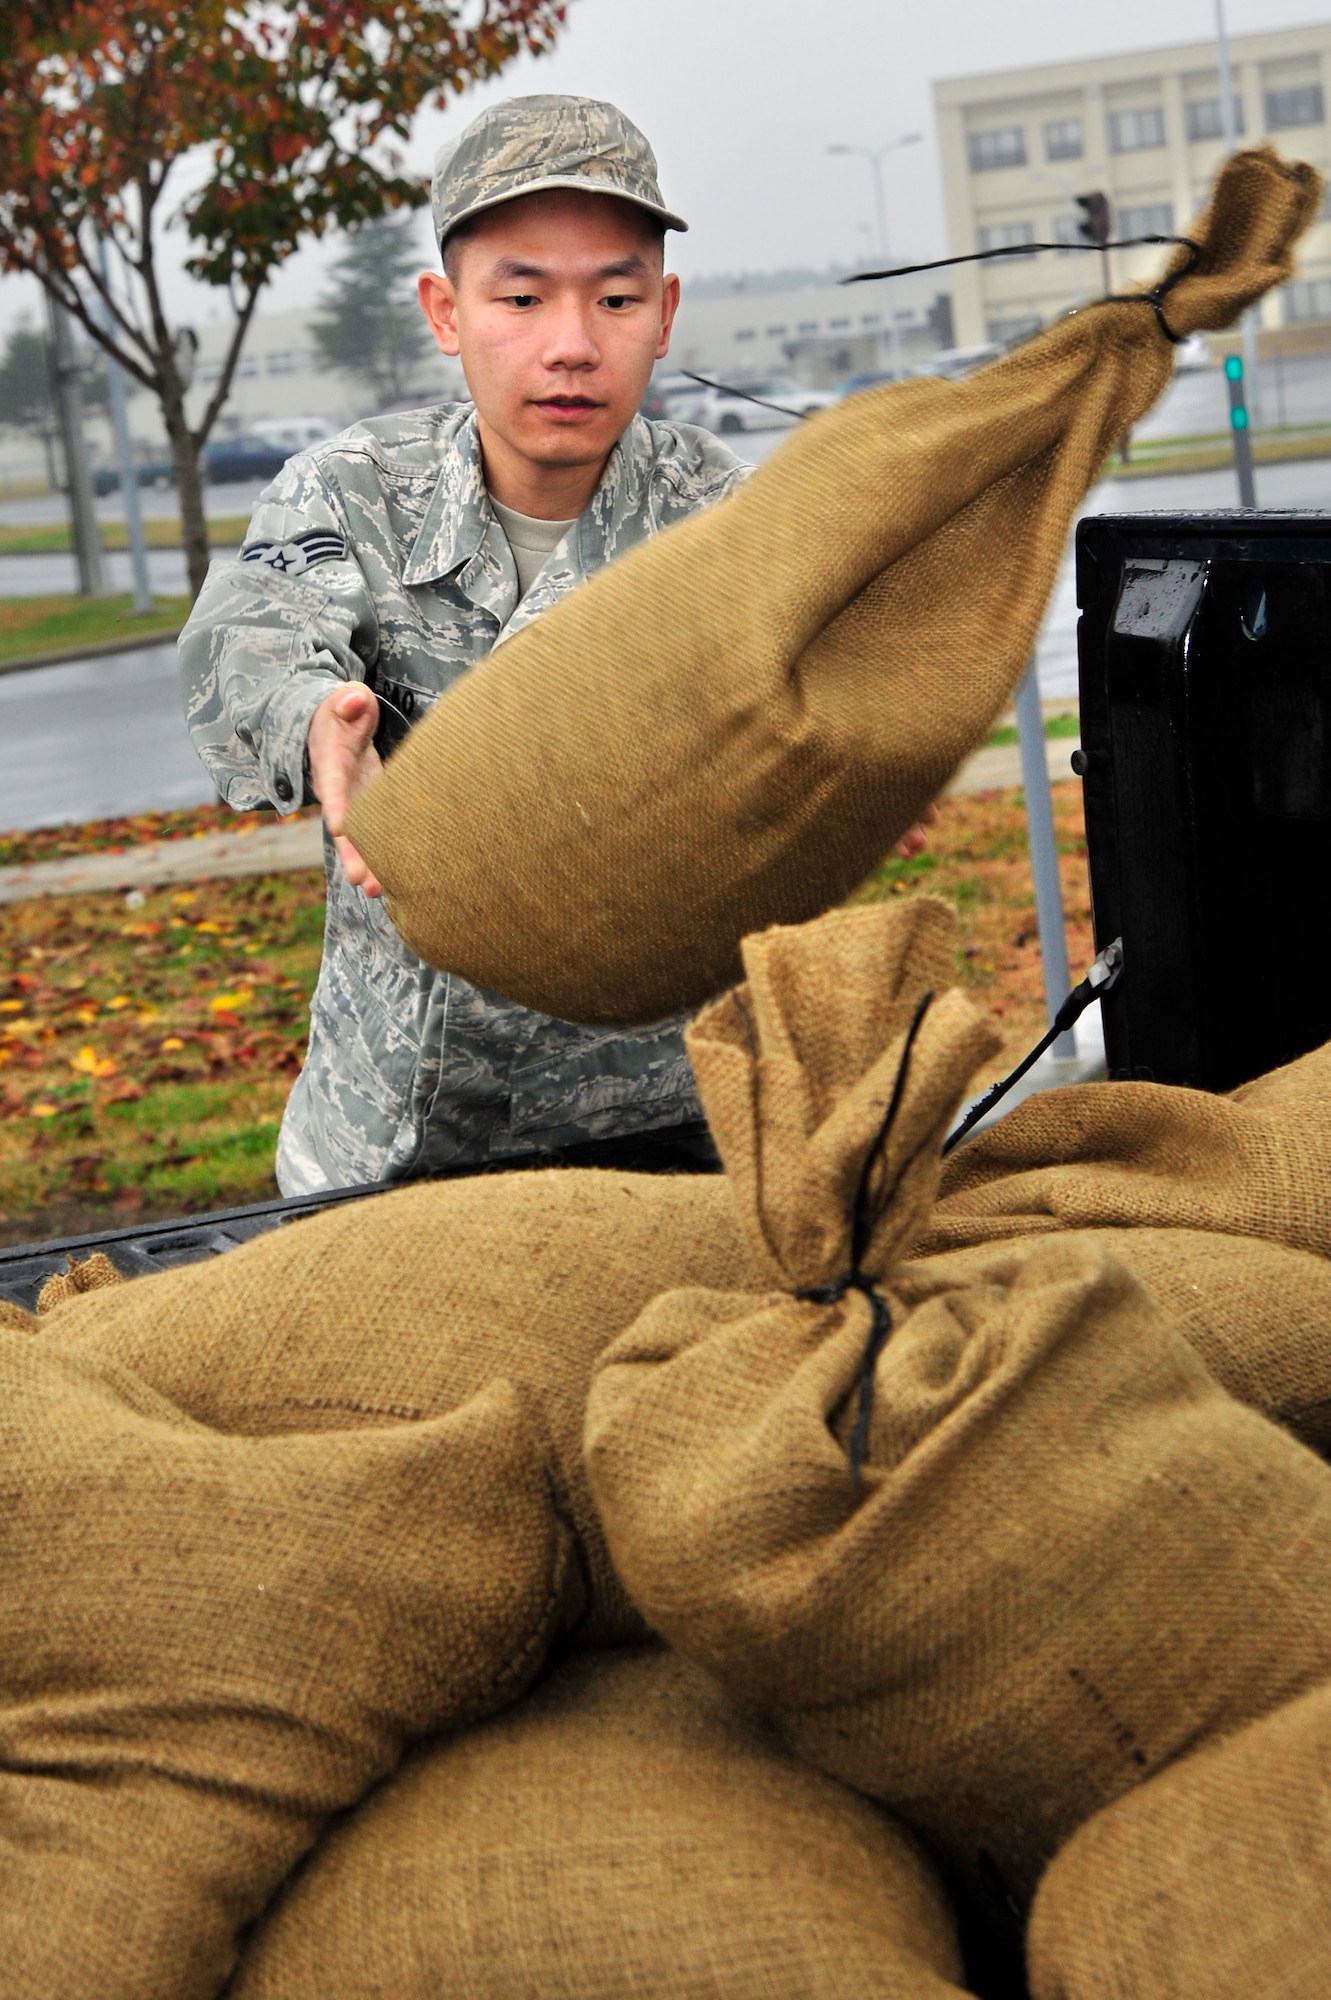 MISAWA AIR BASE, Japan – U.S. Air Force Senior Airman Zhile Cao, 35th Communications Squadron tosses sand bags into the back of a pickup truck. The sand bags will be used to protect building in case of a simulated attack during an operational readiness exercise here Nov. 6. The 35th Fighter Wing is currently going through an ORE in preparation for an operational readiness inspection in December. (U.S. Air Force photo/Staff Sgt. Nathan Lipscomb)